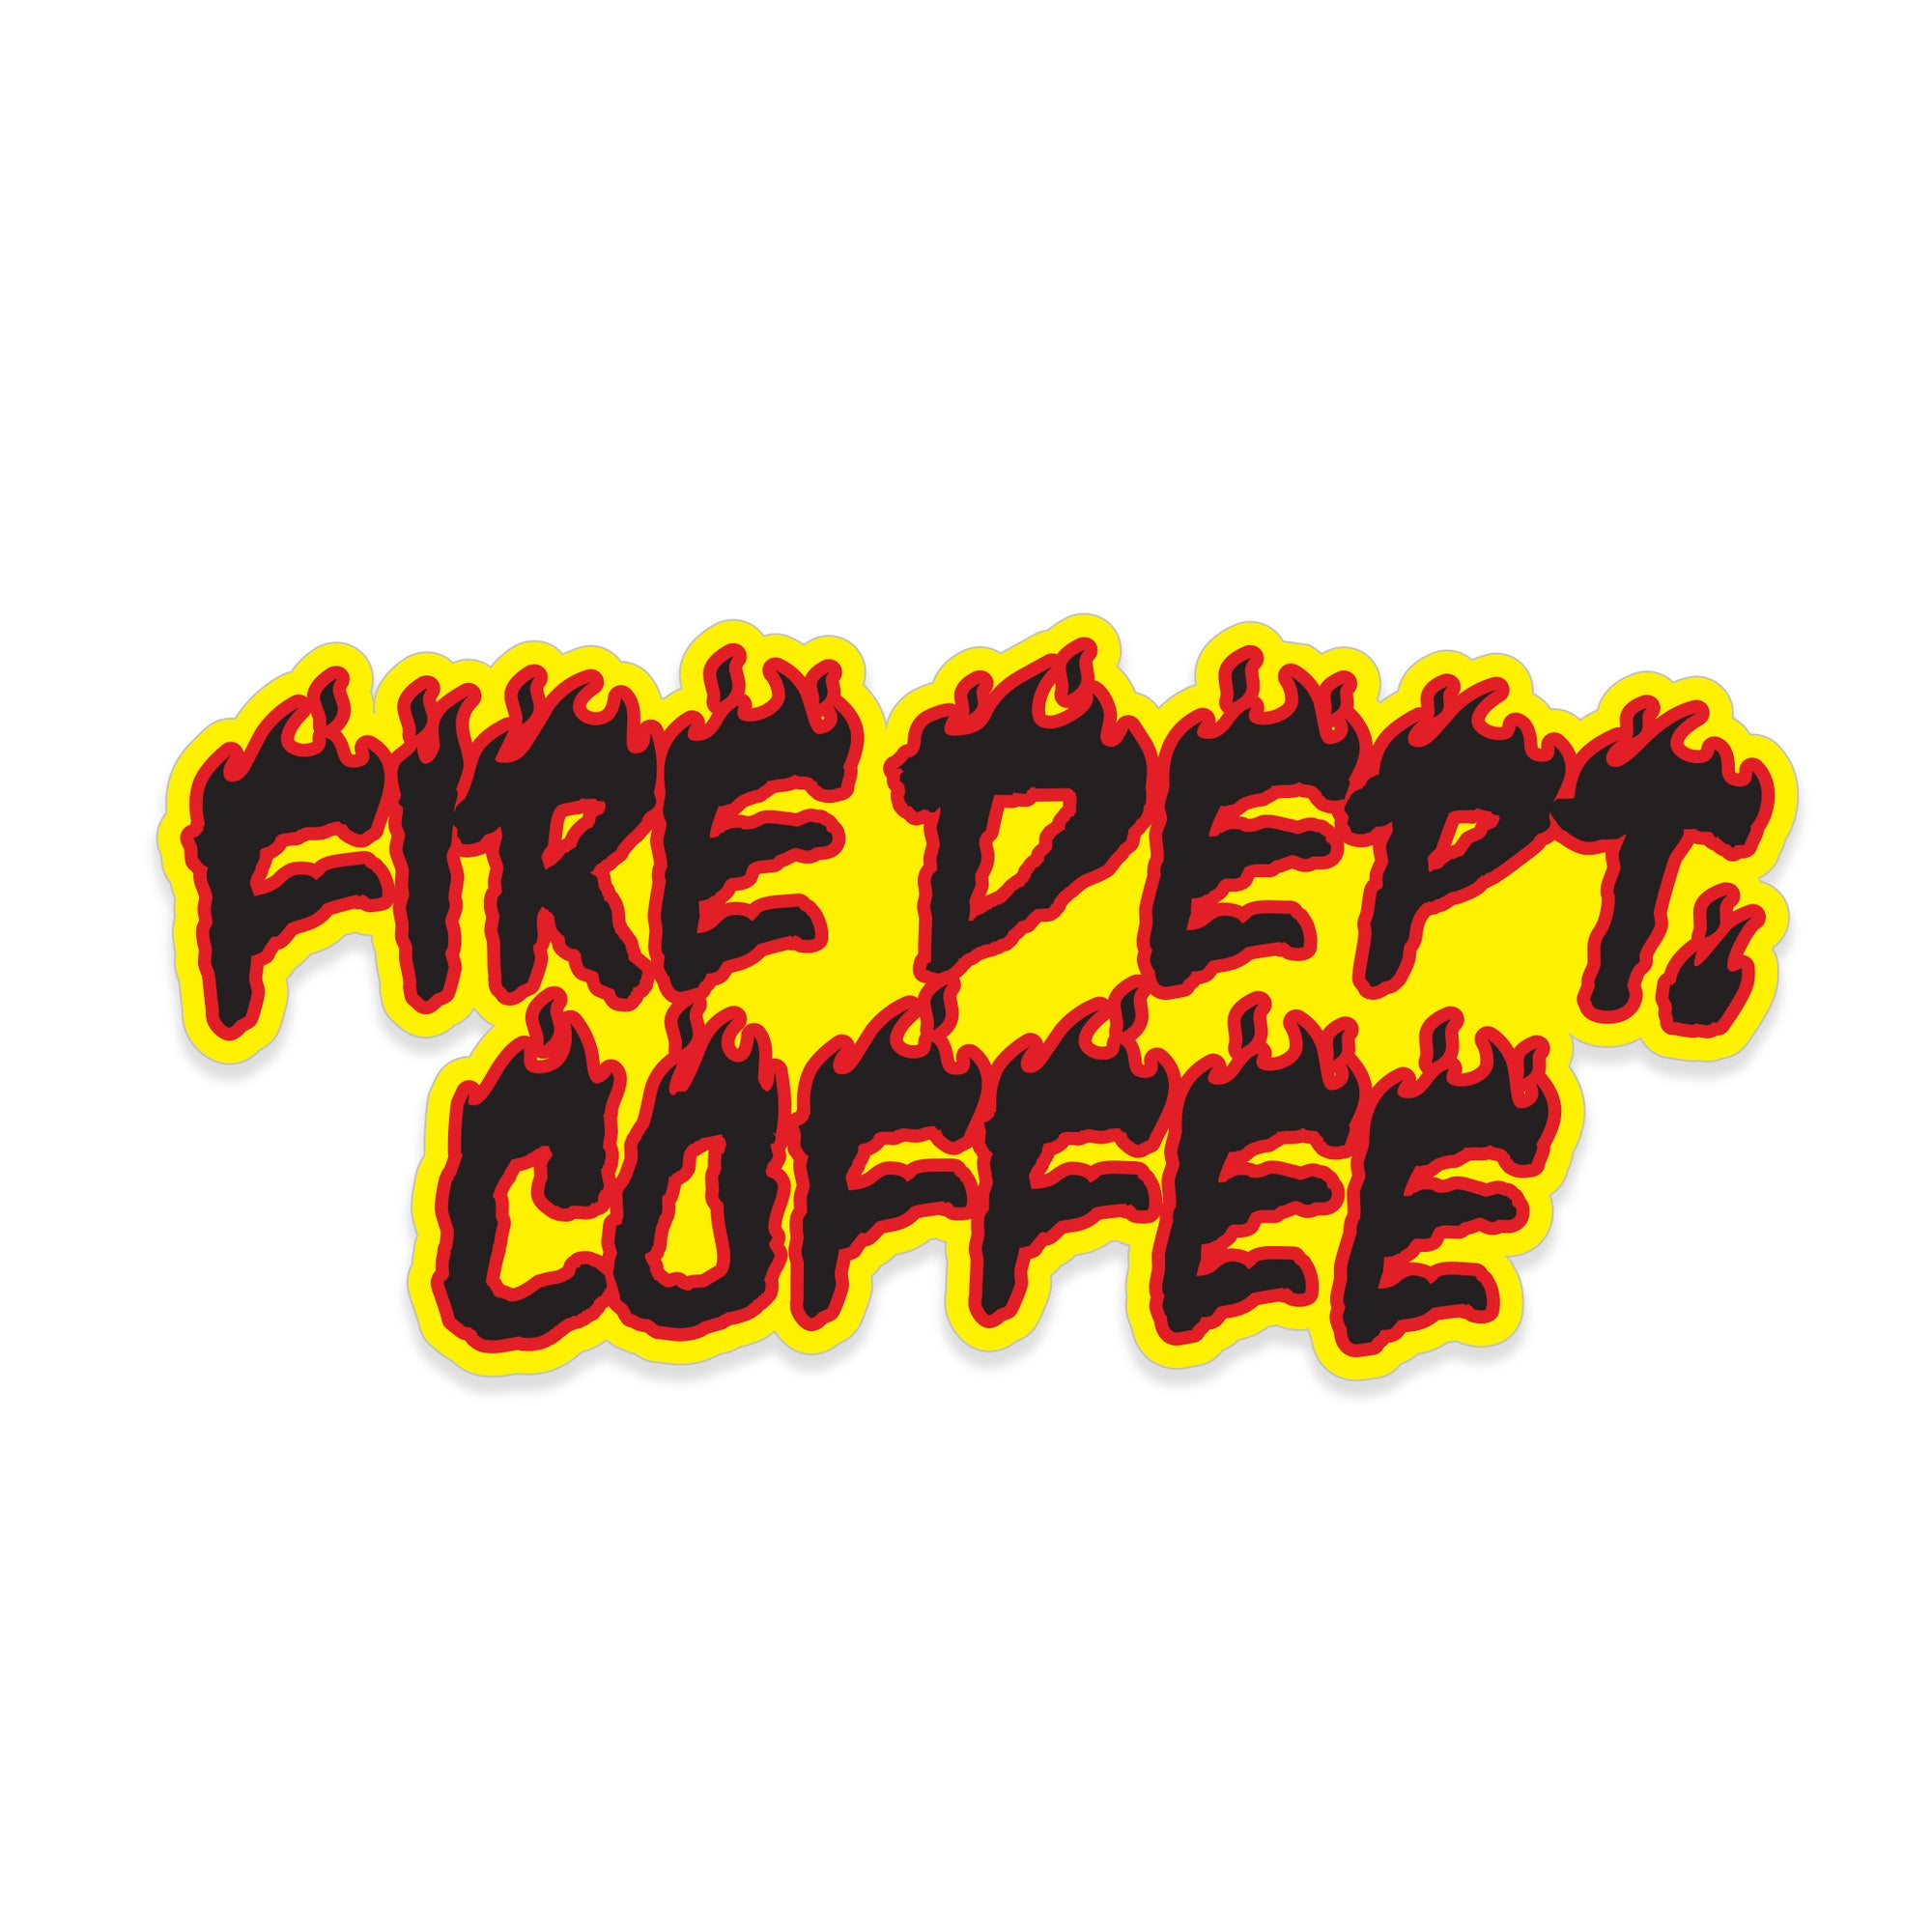 FIRE DEPT. COFFEE spelled out in flaming text with a yellow background